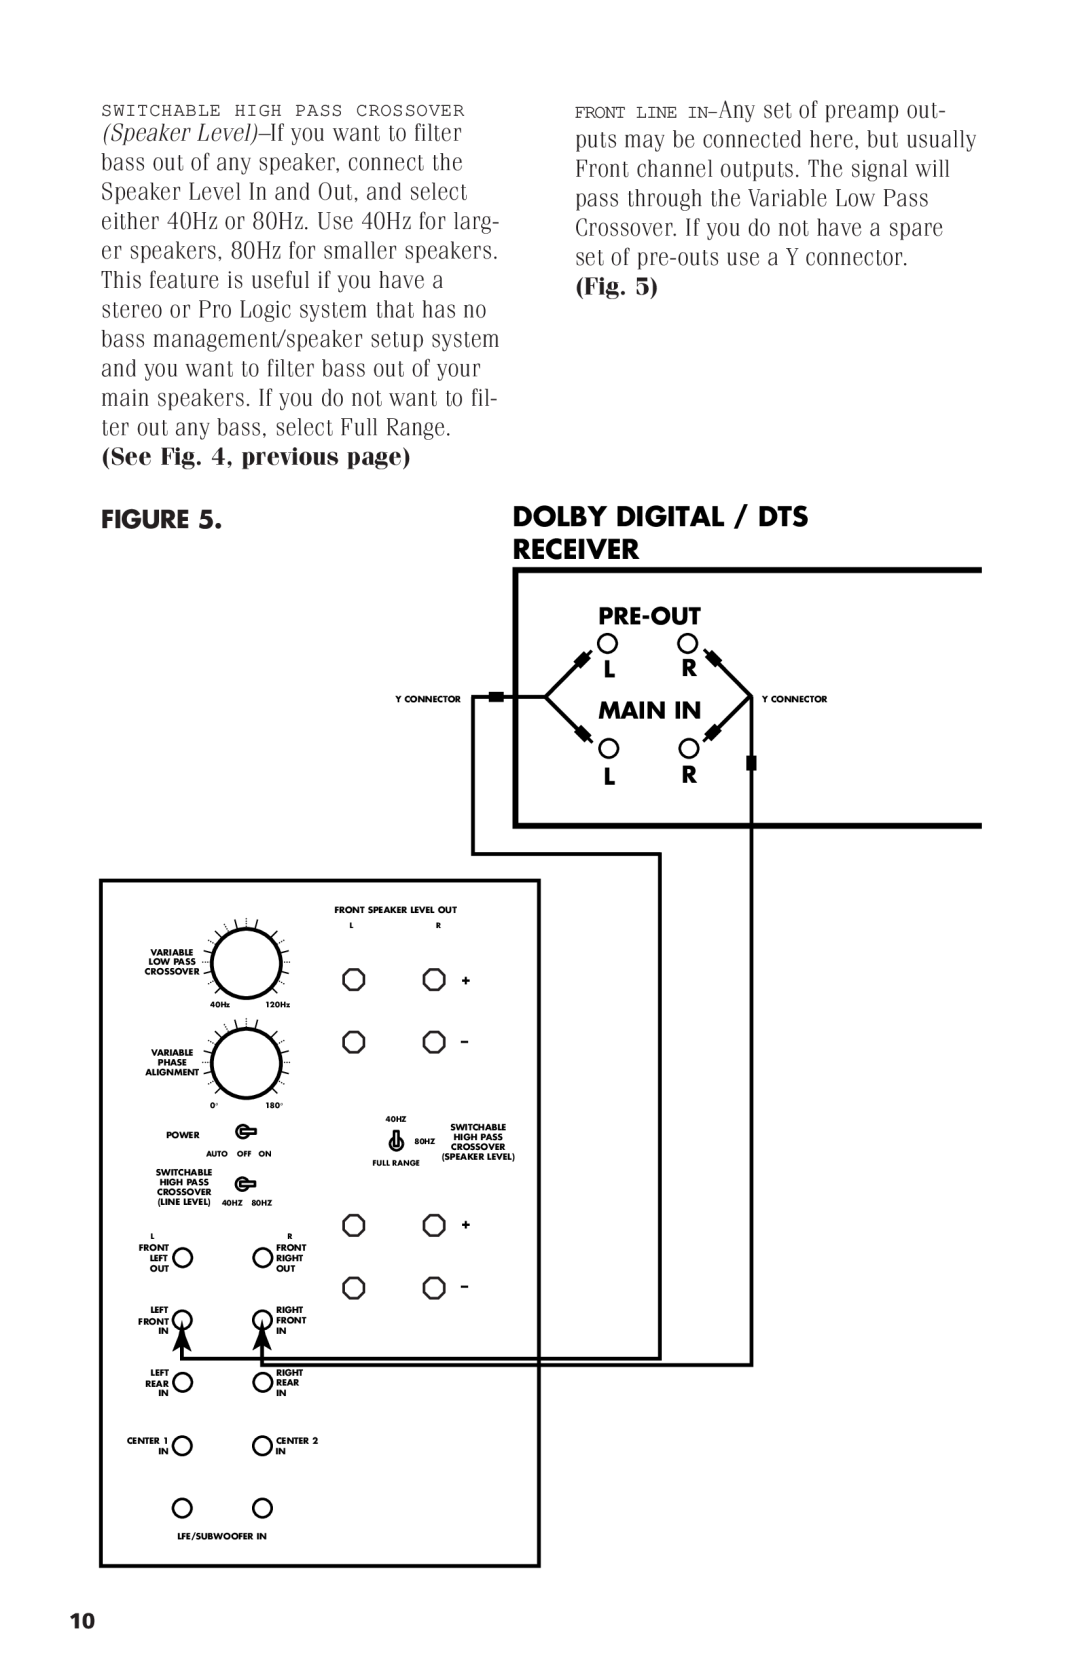 Polk Audio PSW1200 instruction manual Dolby Digital / Dts Receiver, See , previous page 